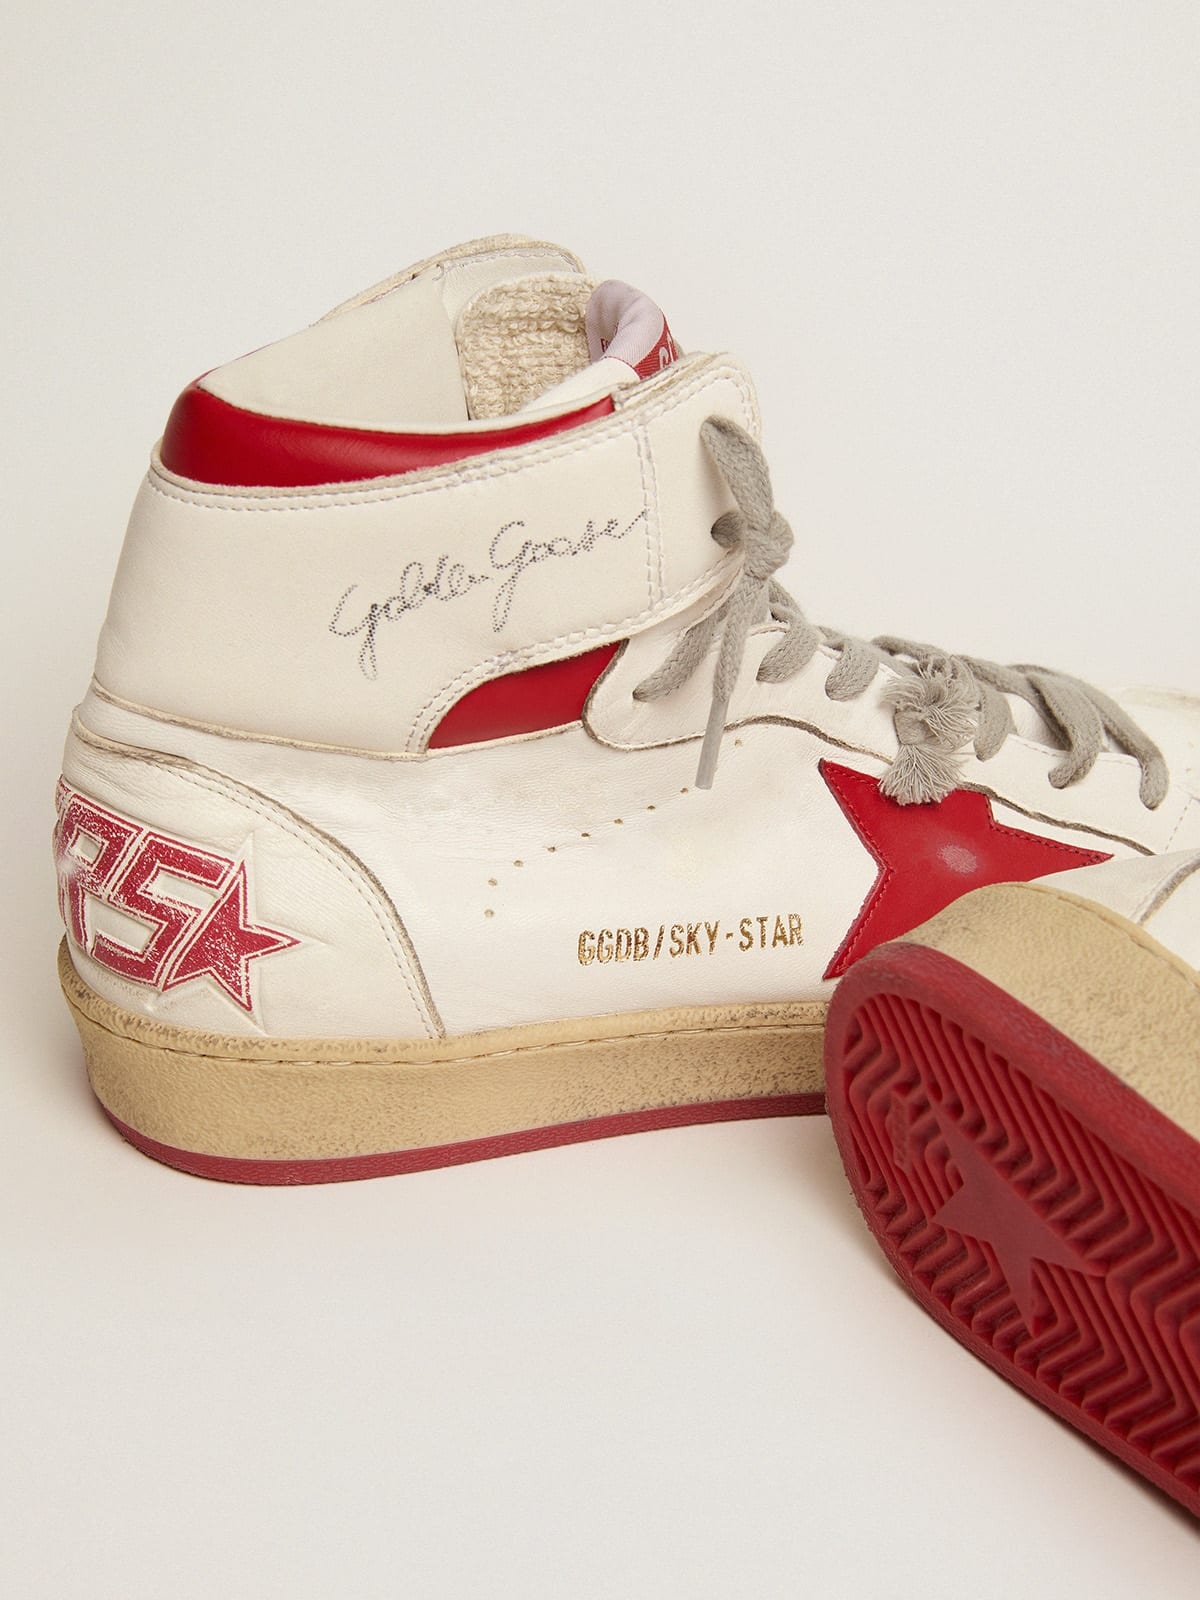 Sky-Star sneakers in white nappa leather with red leather star and heel tab - 3